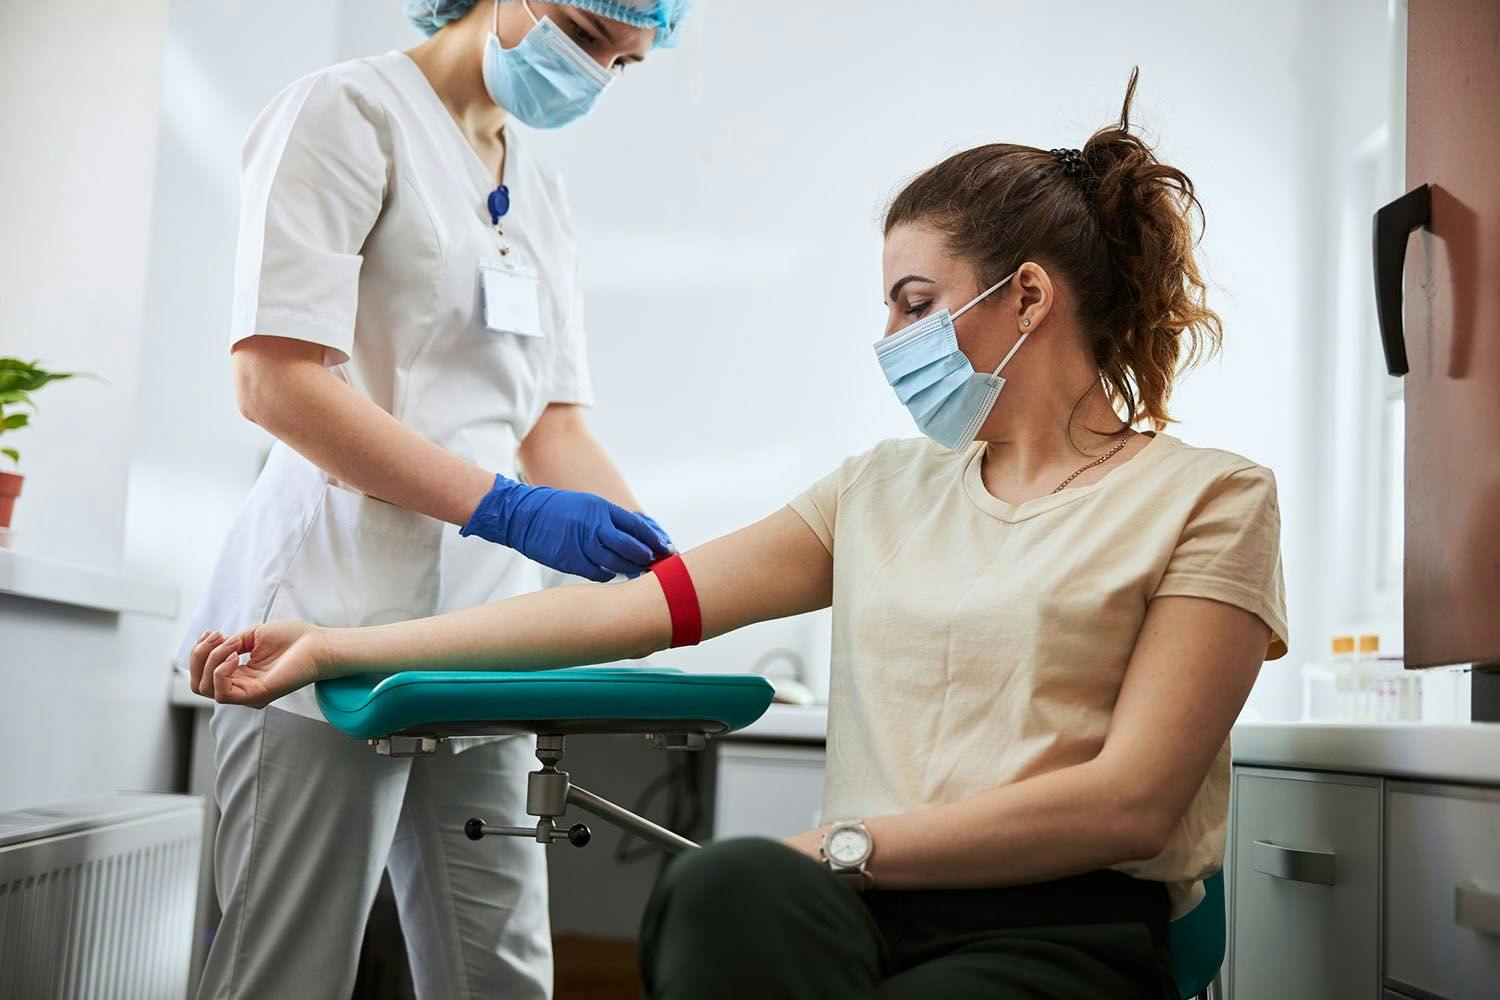 Do Phlebotomists Need Certification in California?